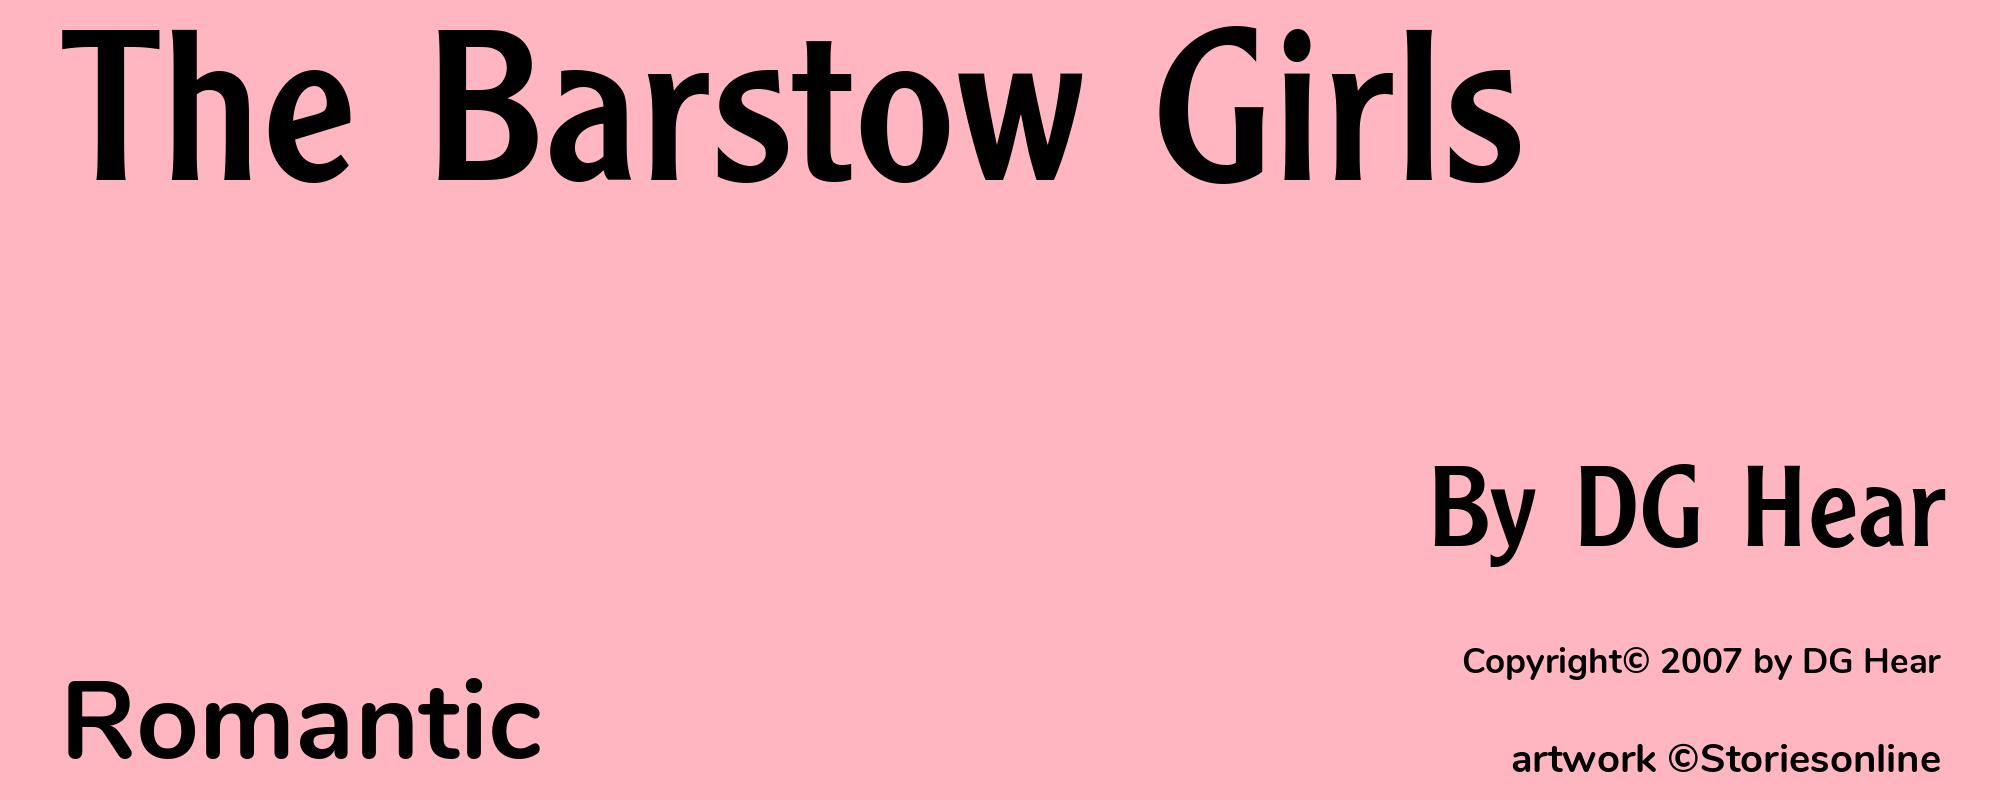 The Barstow Girls - Cover